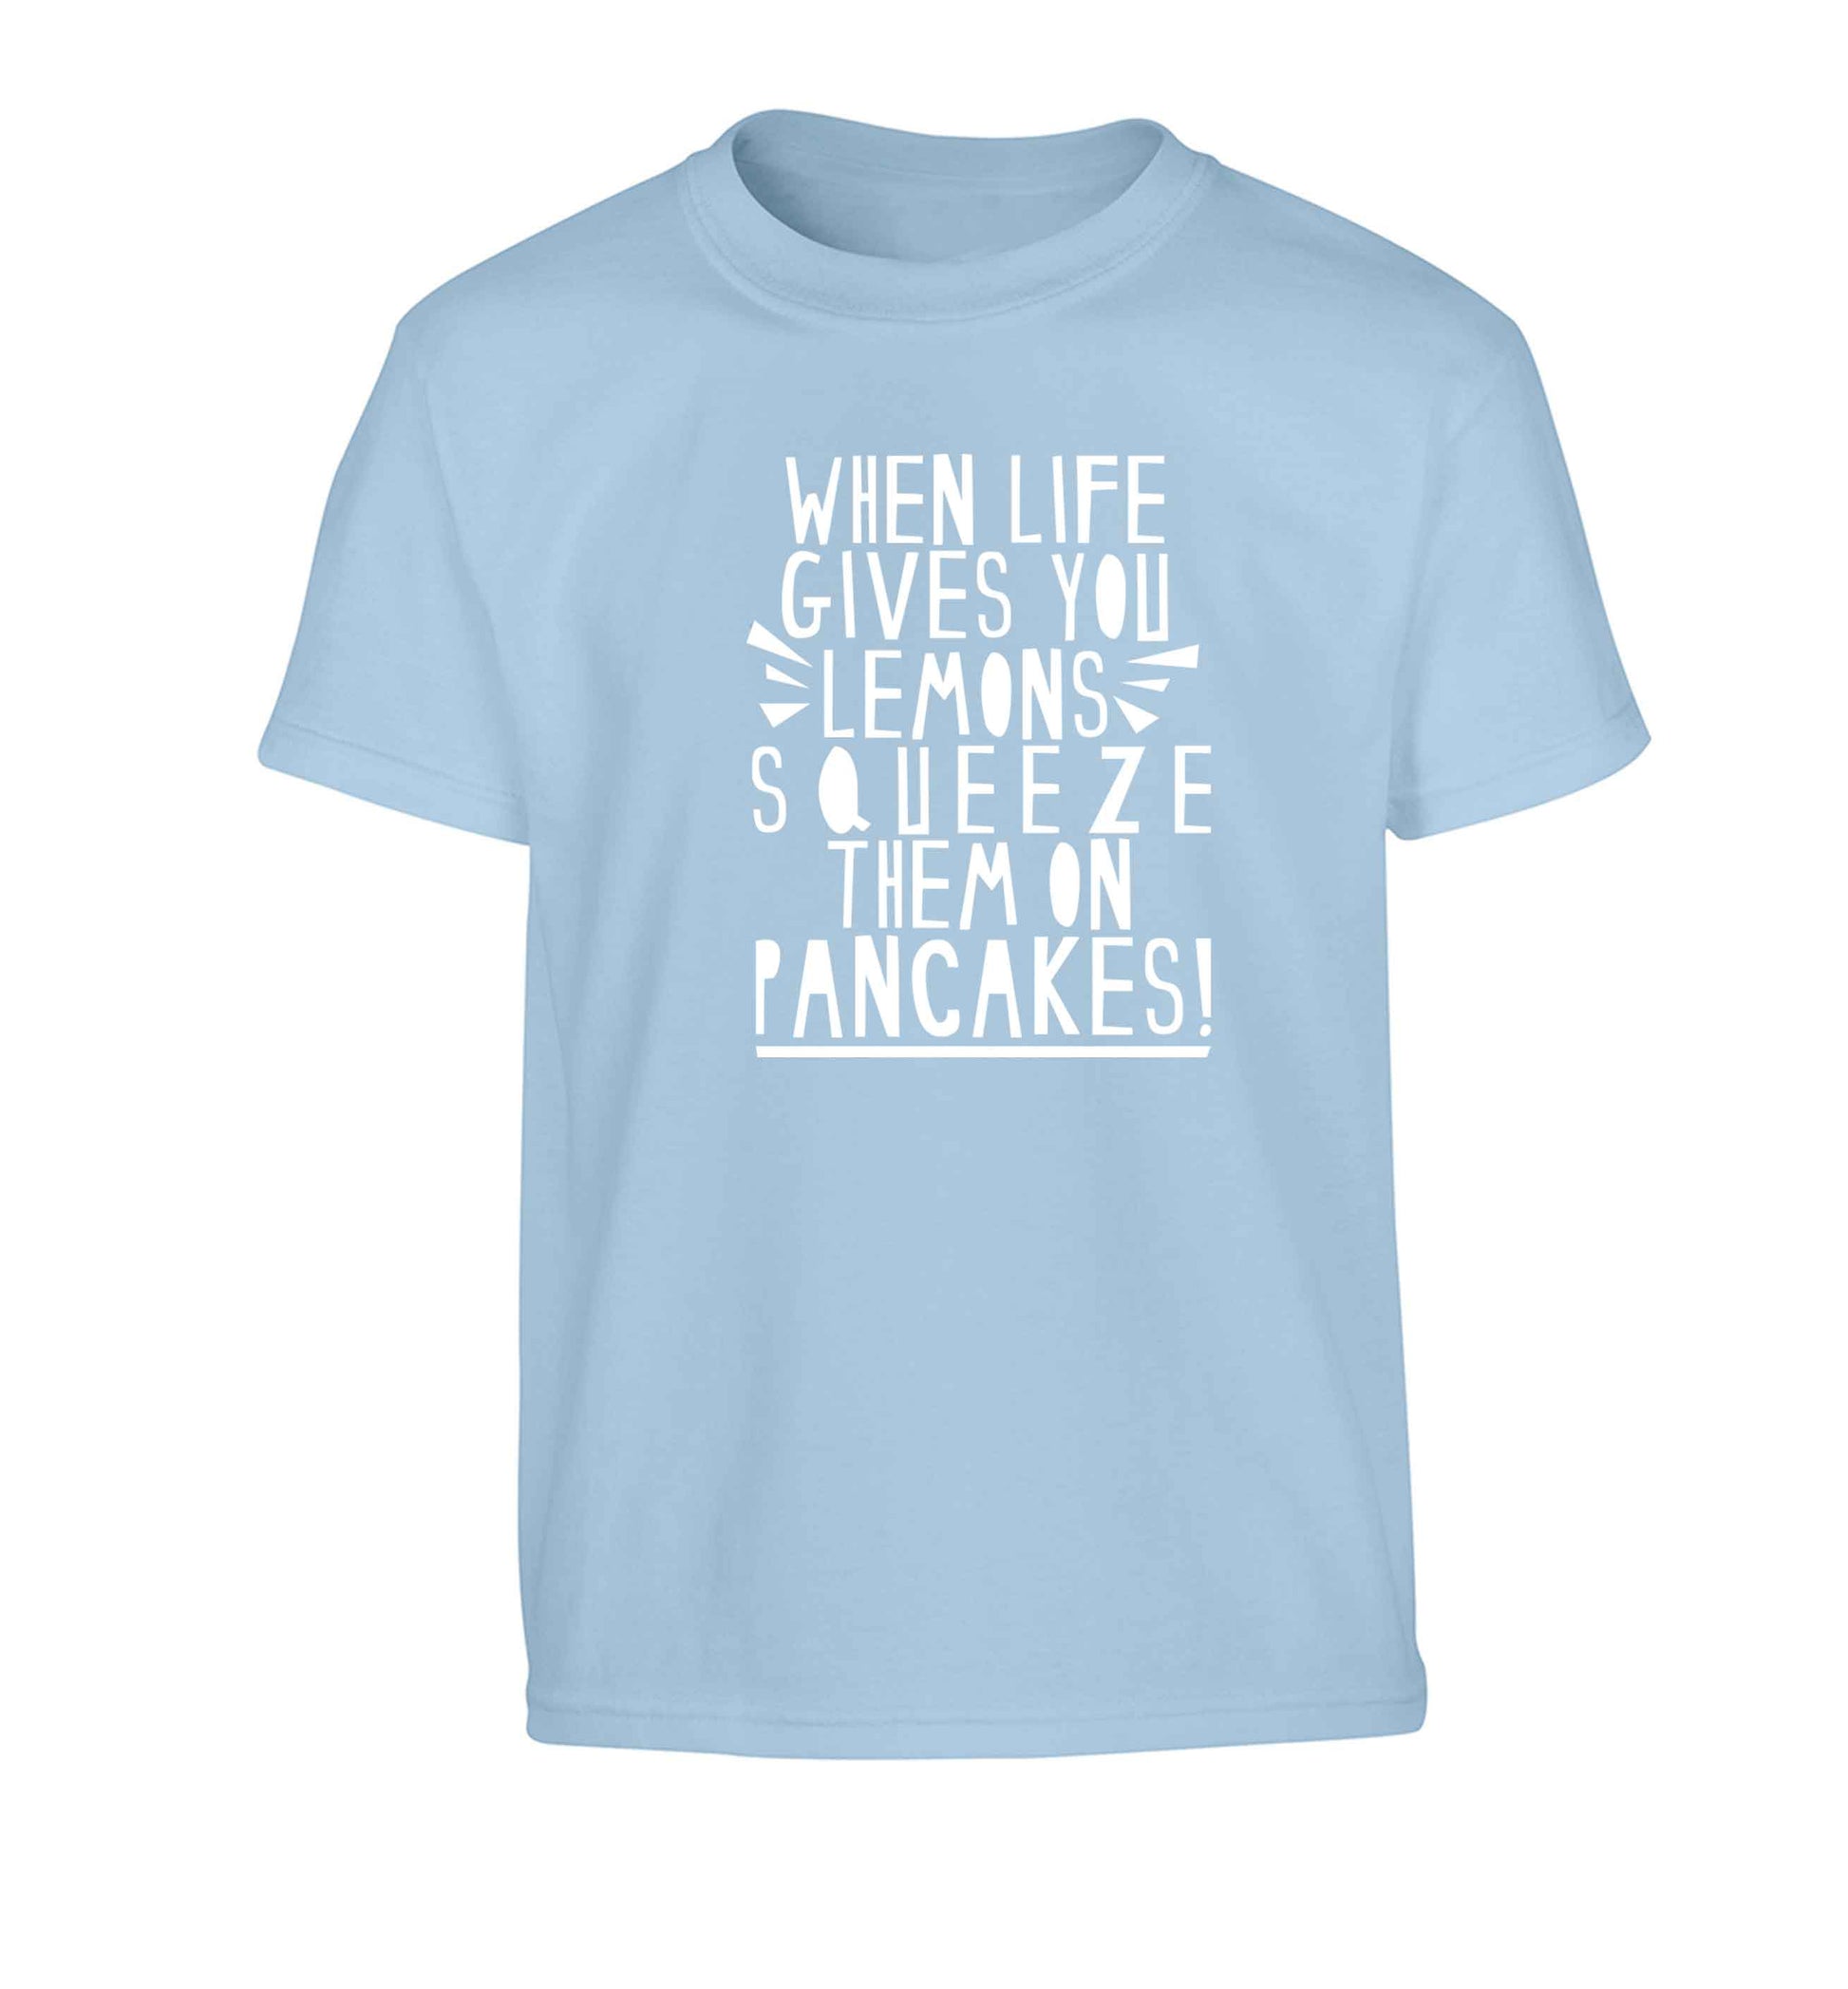 When life gives you lemons squeeze them on pancakes! Children's light blue Tshirt 12-13 Years